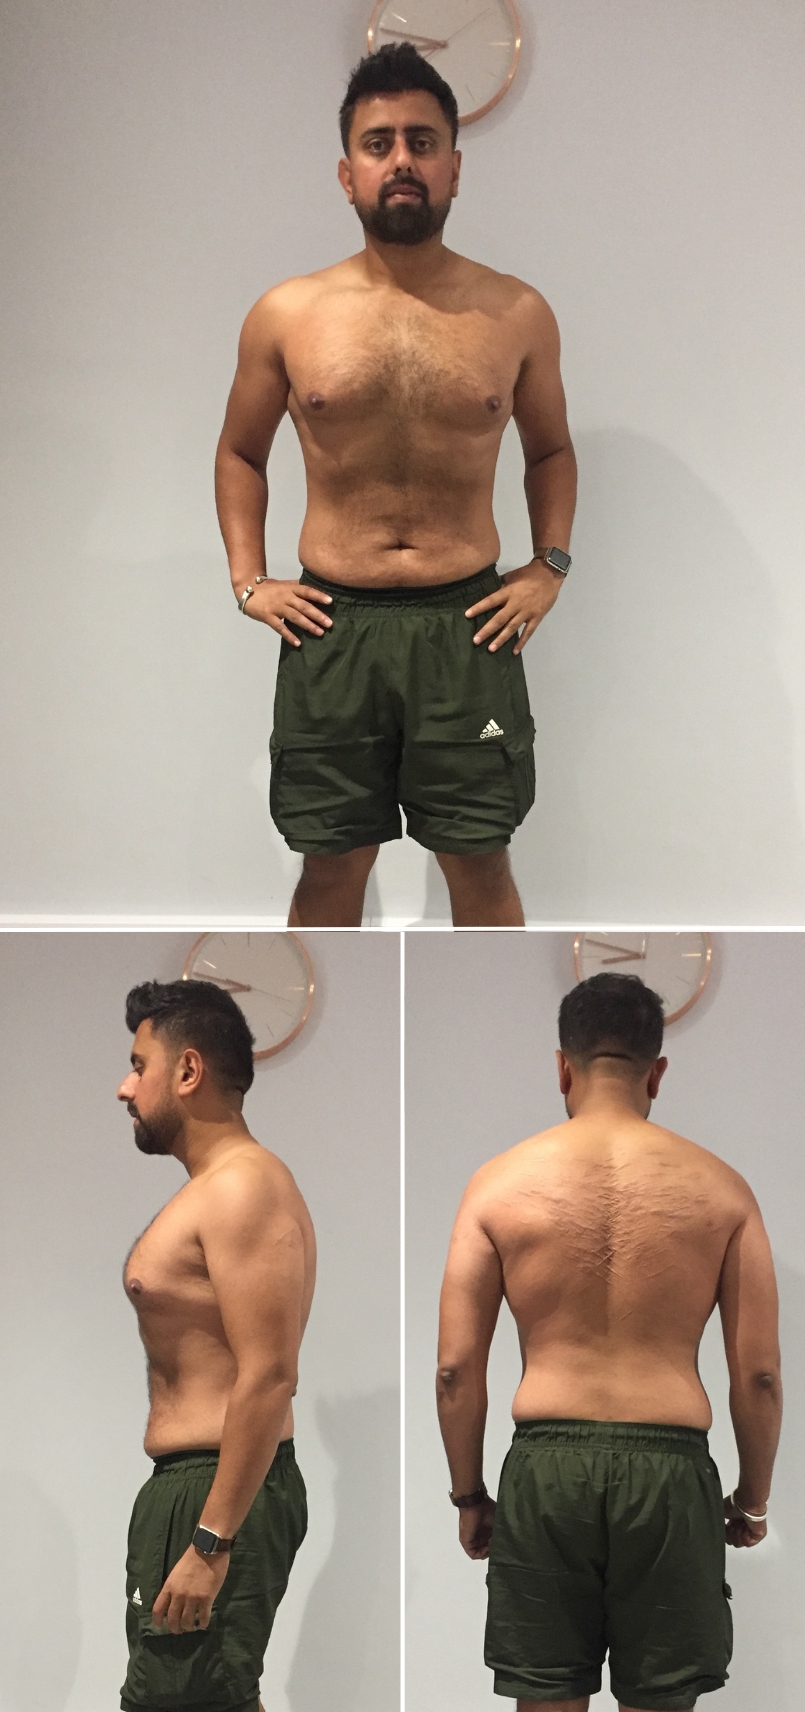 Raza's after personal training transformation pictures